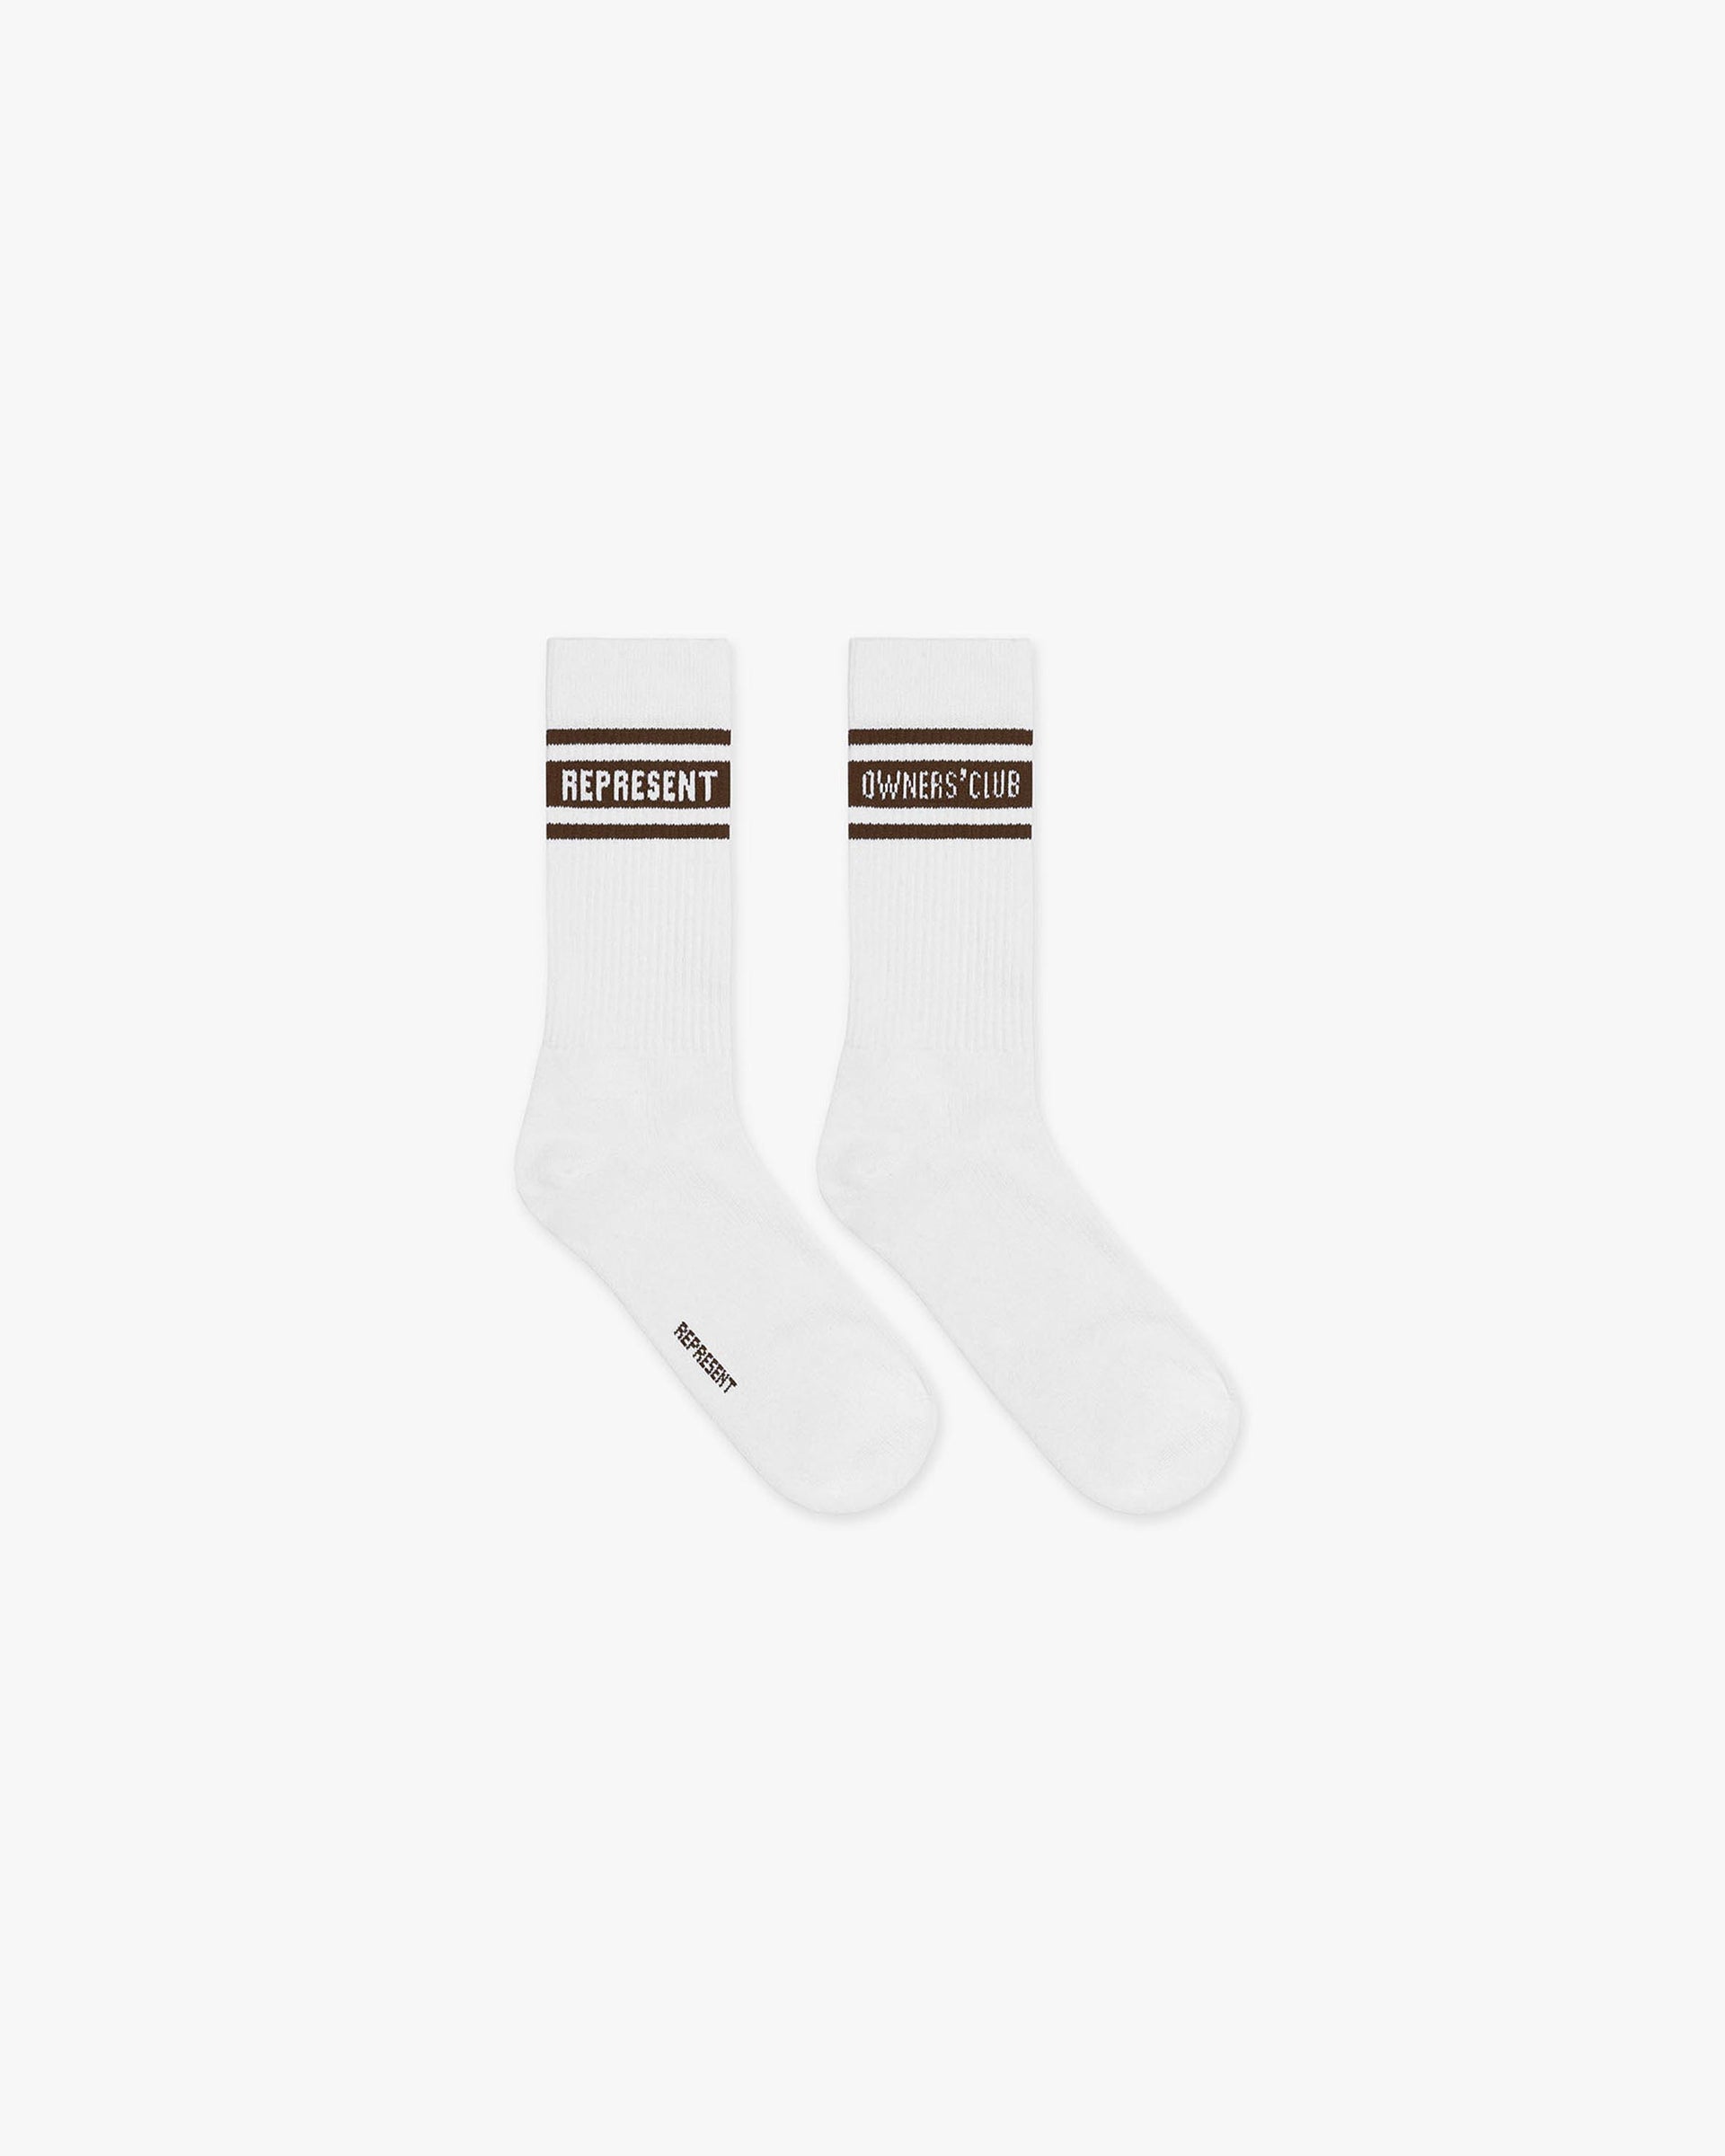 Represent Owners Club Socks | Flat White/Brown Accessories Owners Club | Represent Clo